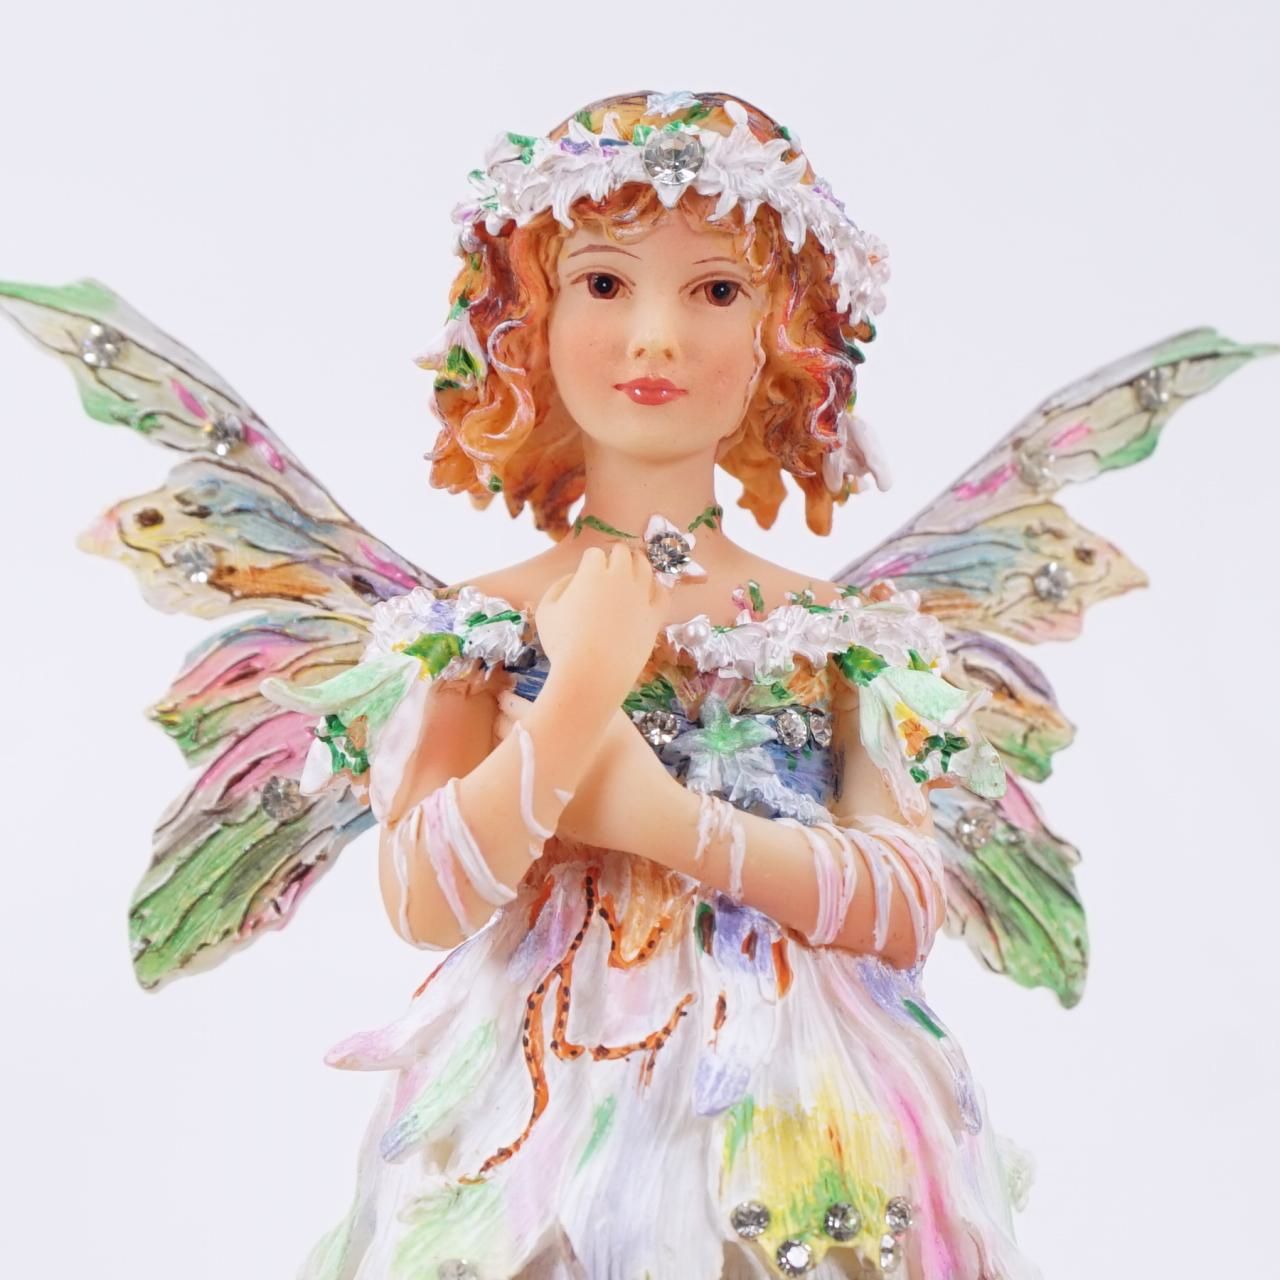 Crisalis Collection★ Early Snowdrop Faerie (1-1048) 30% OFF